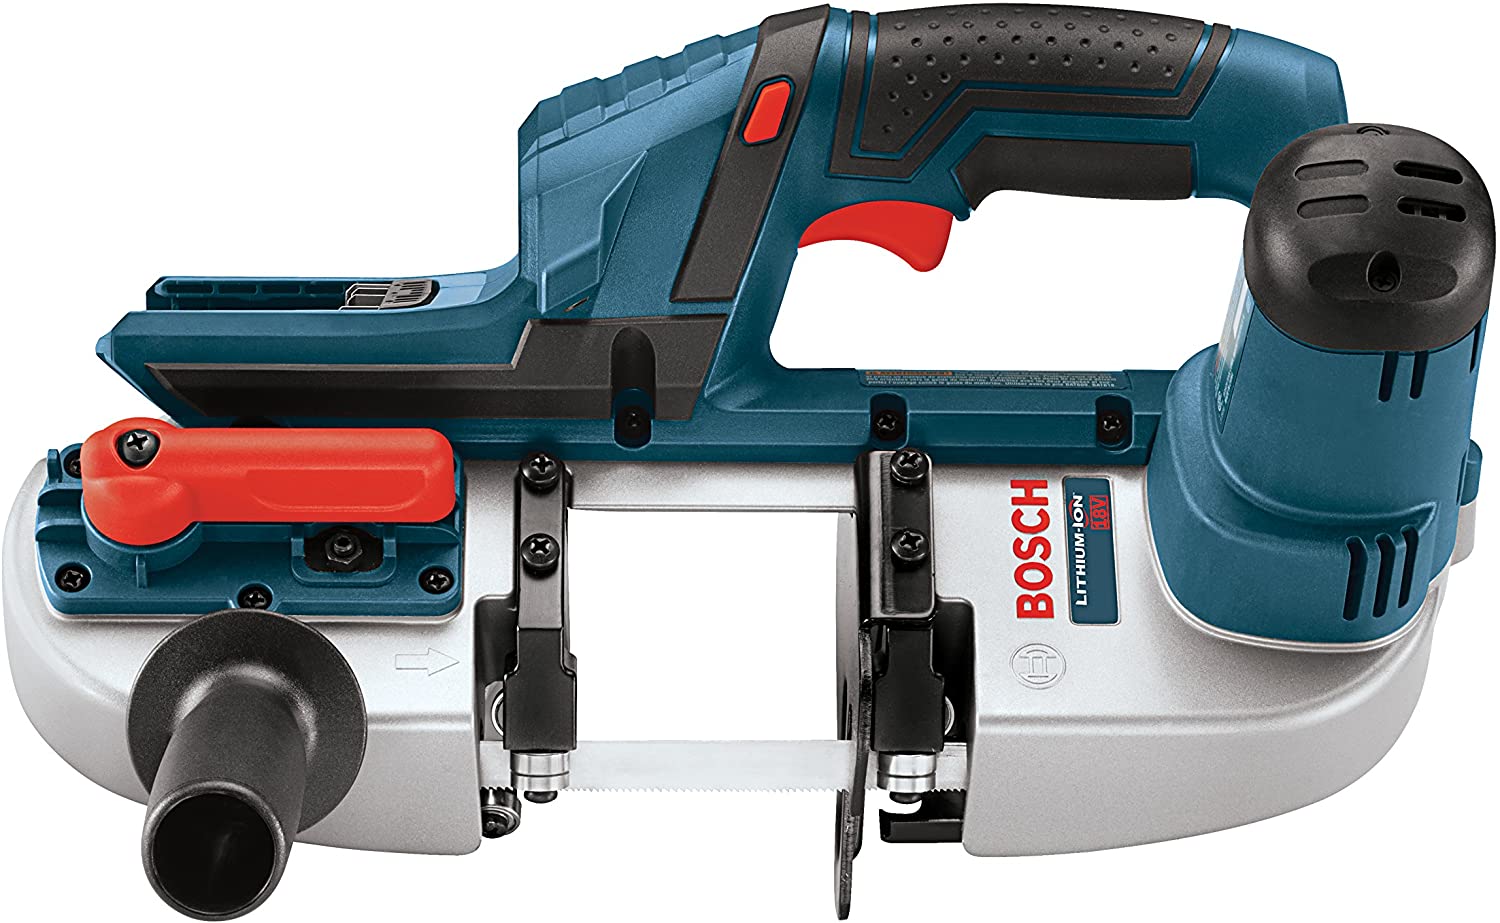 Bosch Compact Band Saw